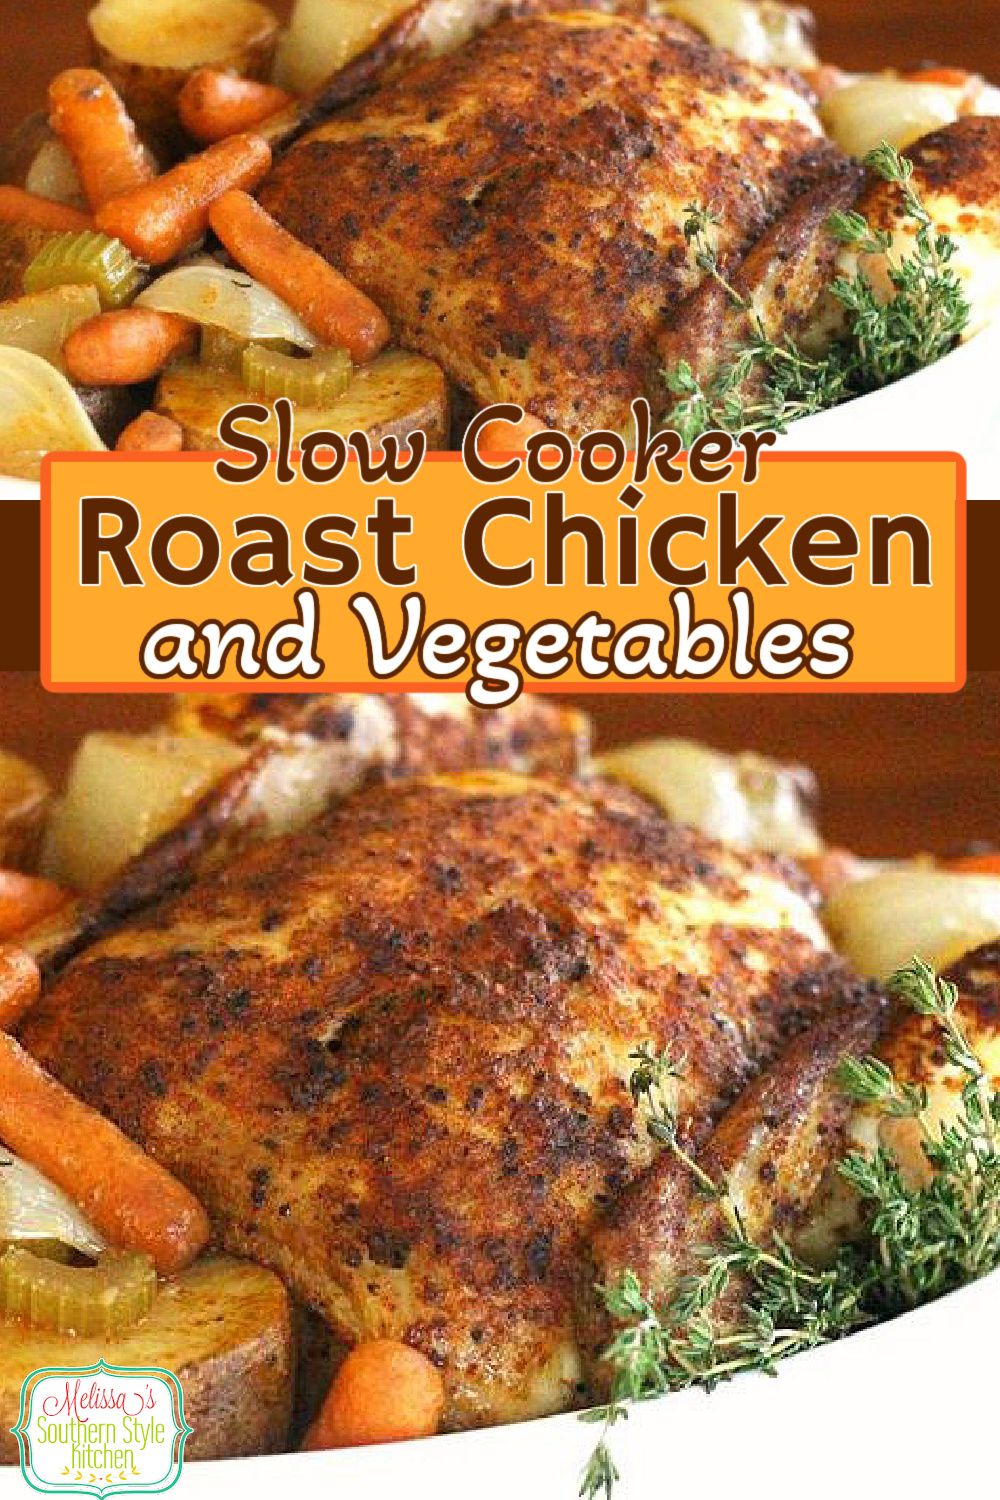 Make this delicious chicken dinner classic with ease using your slow cooker #roastchicken #slowcookerchicken #slowcookerroastchicken #easychickenrecipes #chicken #vegetables #slowcookerrecipes #crockpotchickenrecipes #dinner #dinnerideas #southernfood #southernrecipes via @melissasssk